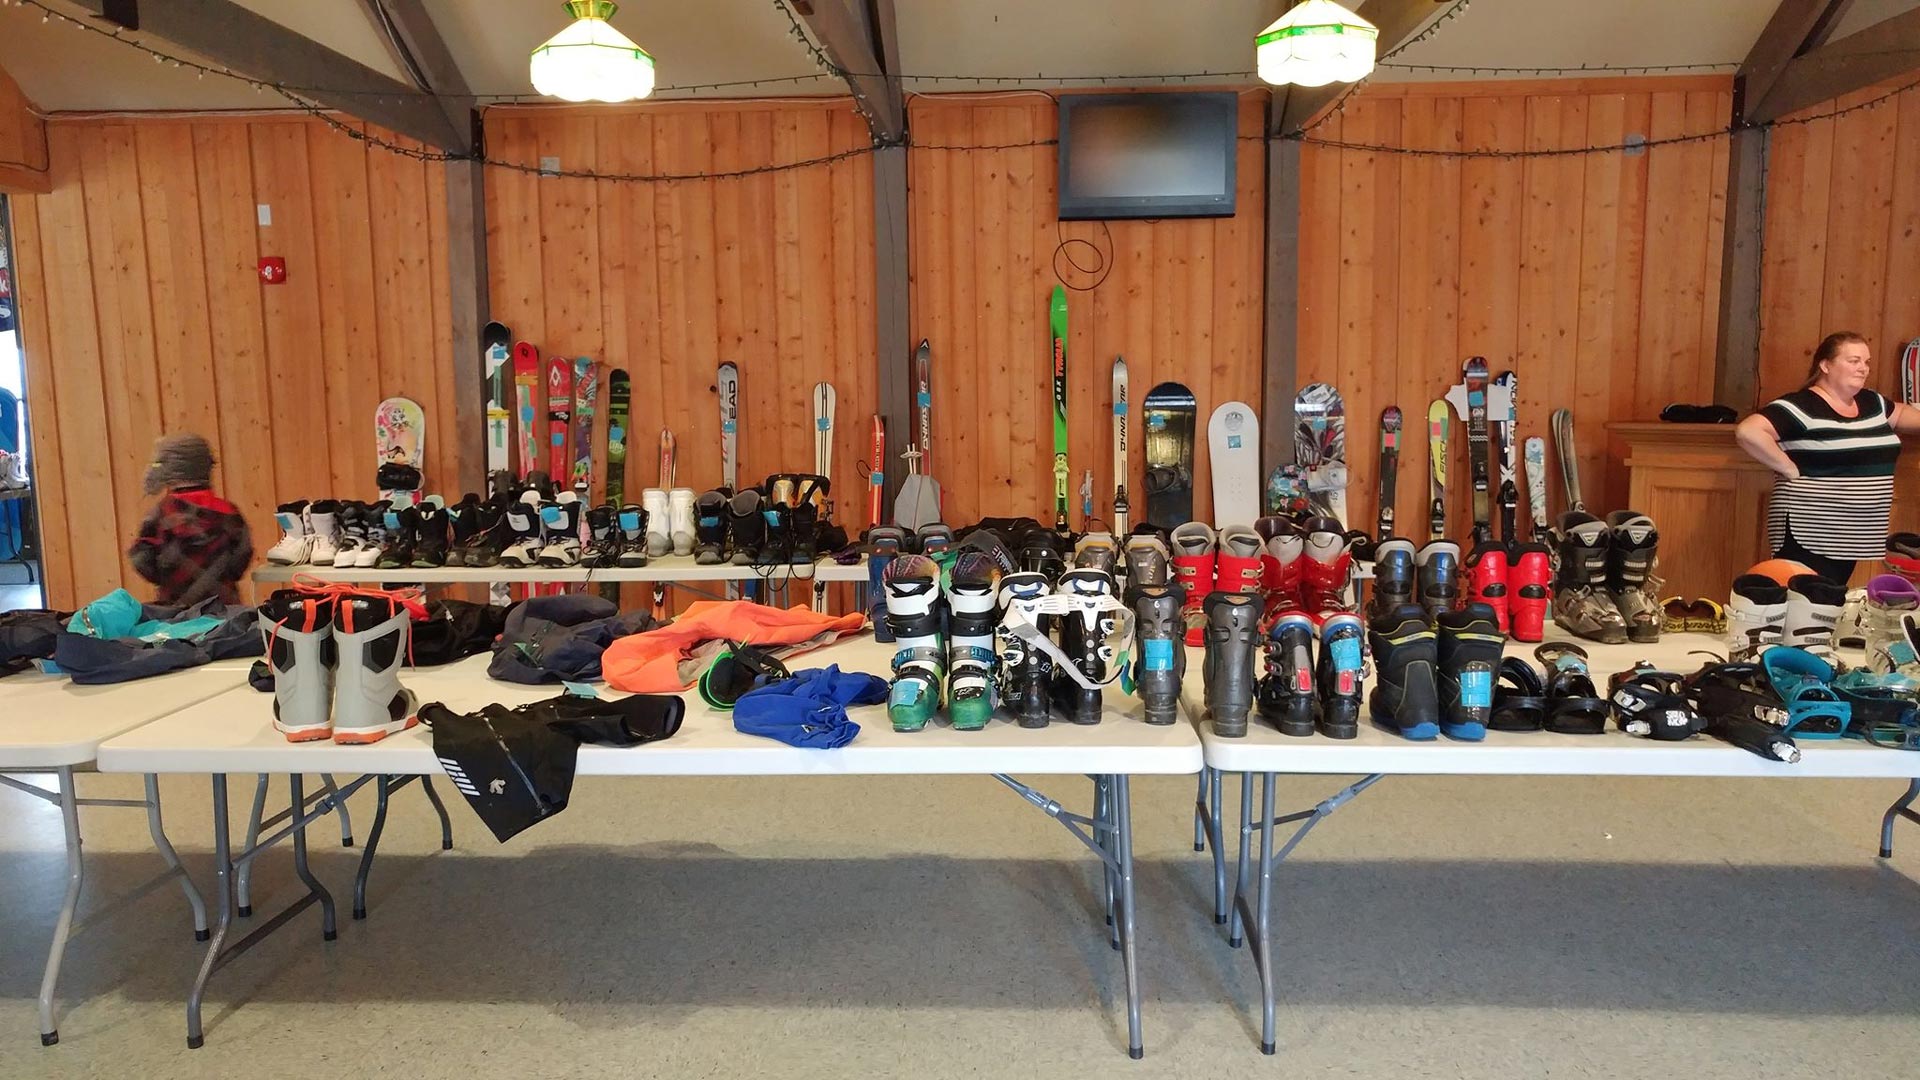 Tables filled with ski boots